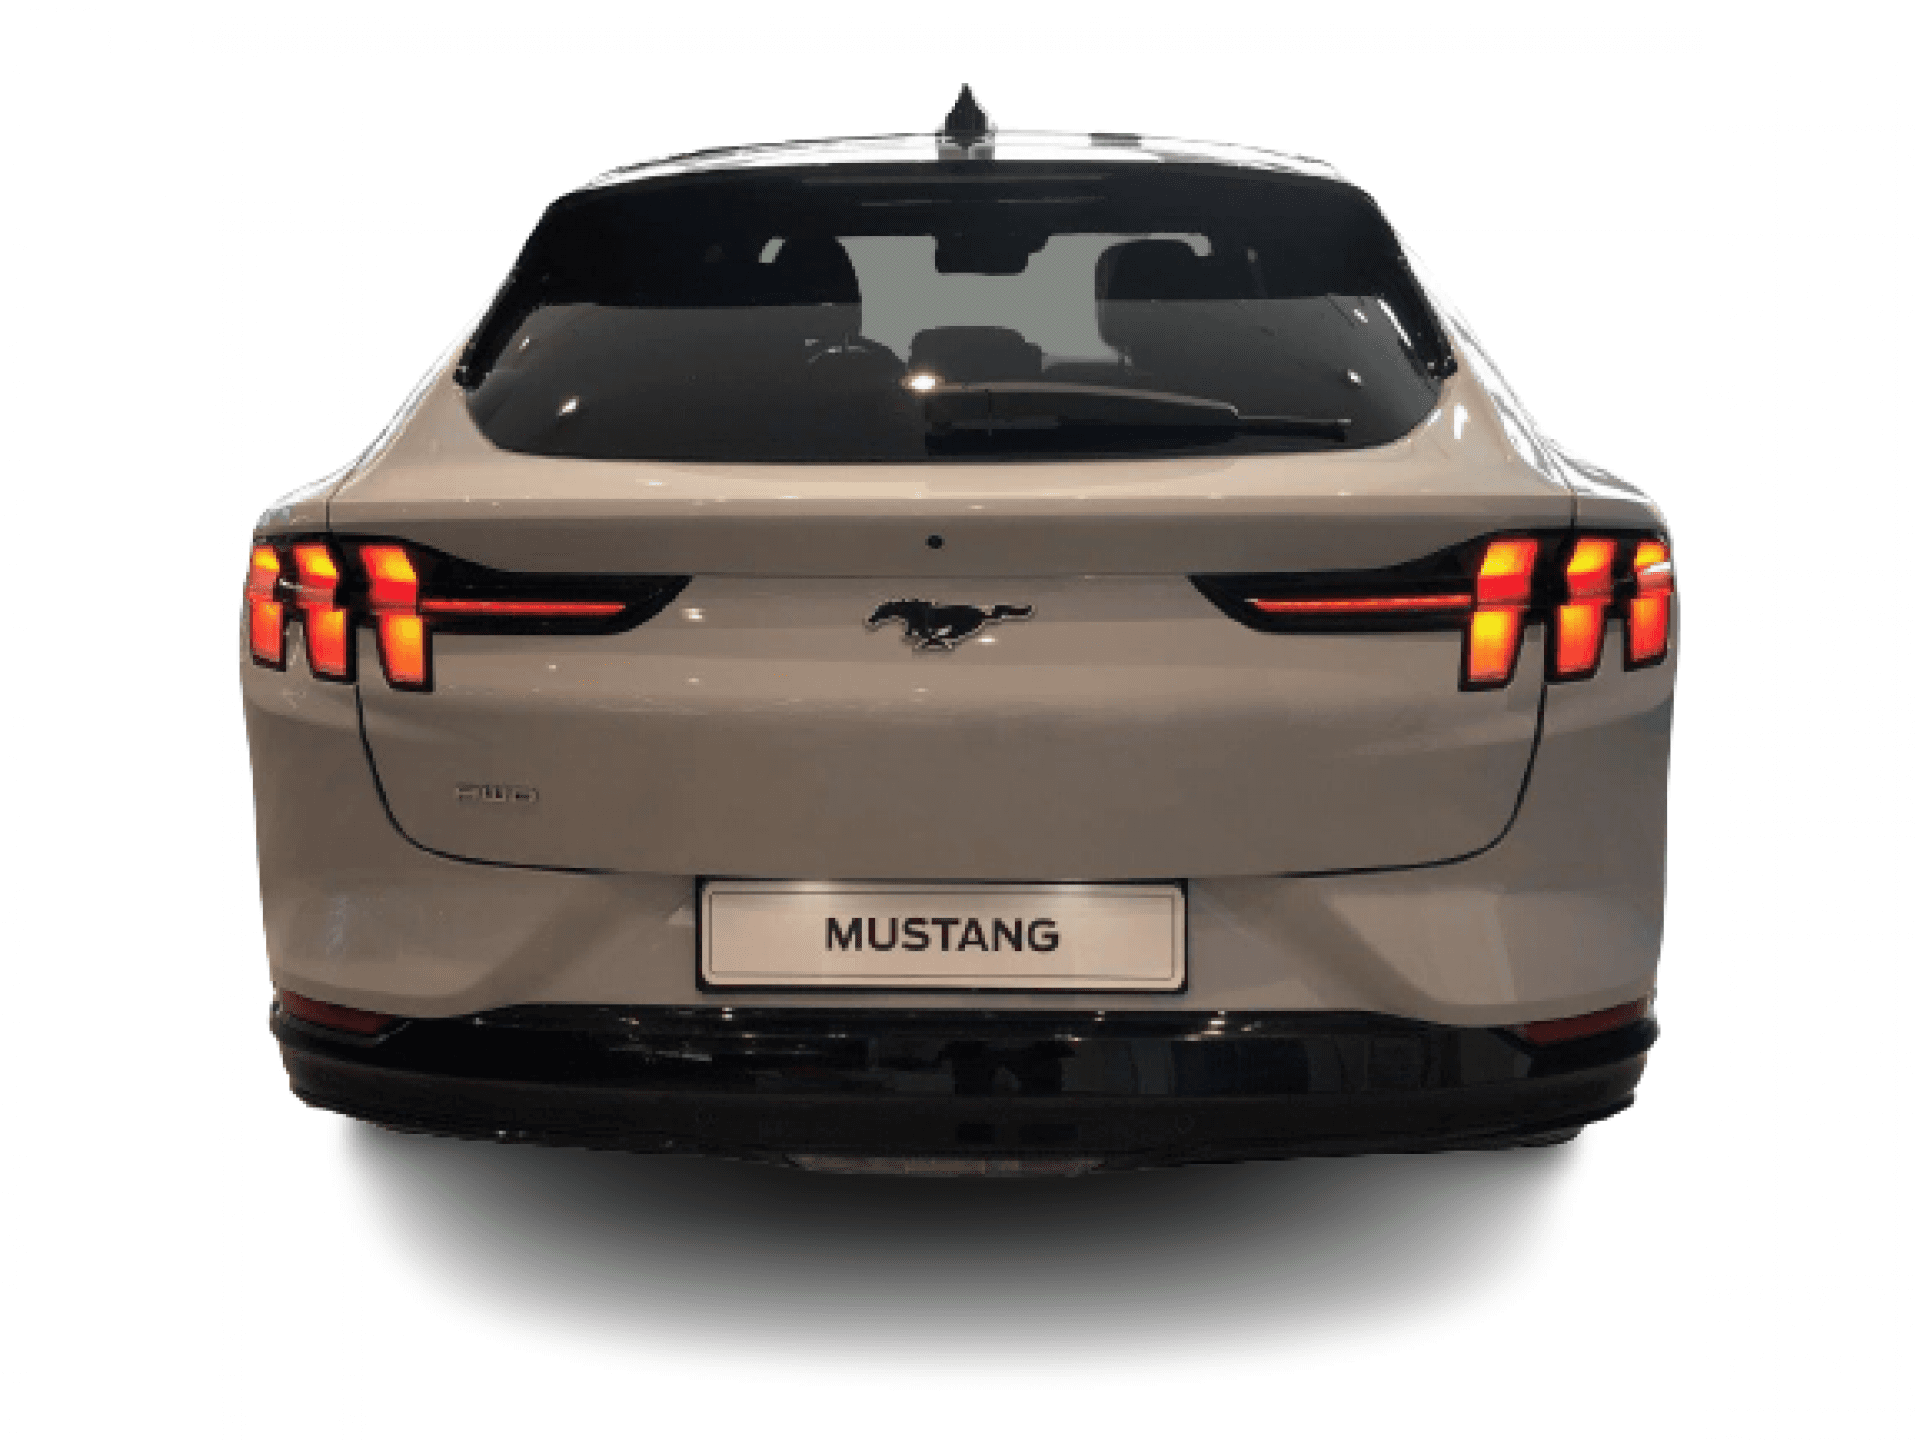 Ford Mustang Mach-E AWD 258kW Batería 98.8Kwh nuevo Barcelona